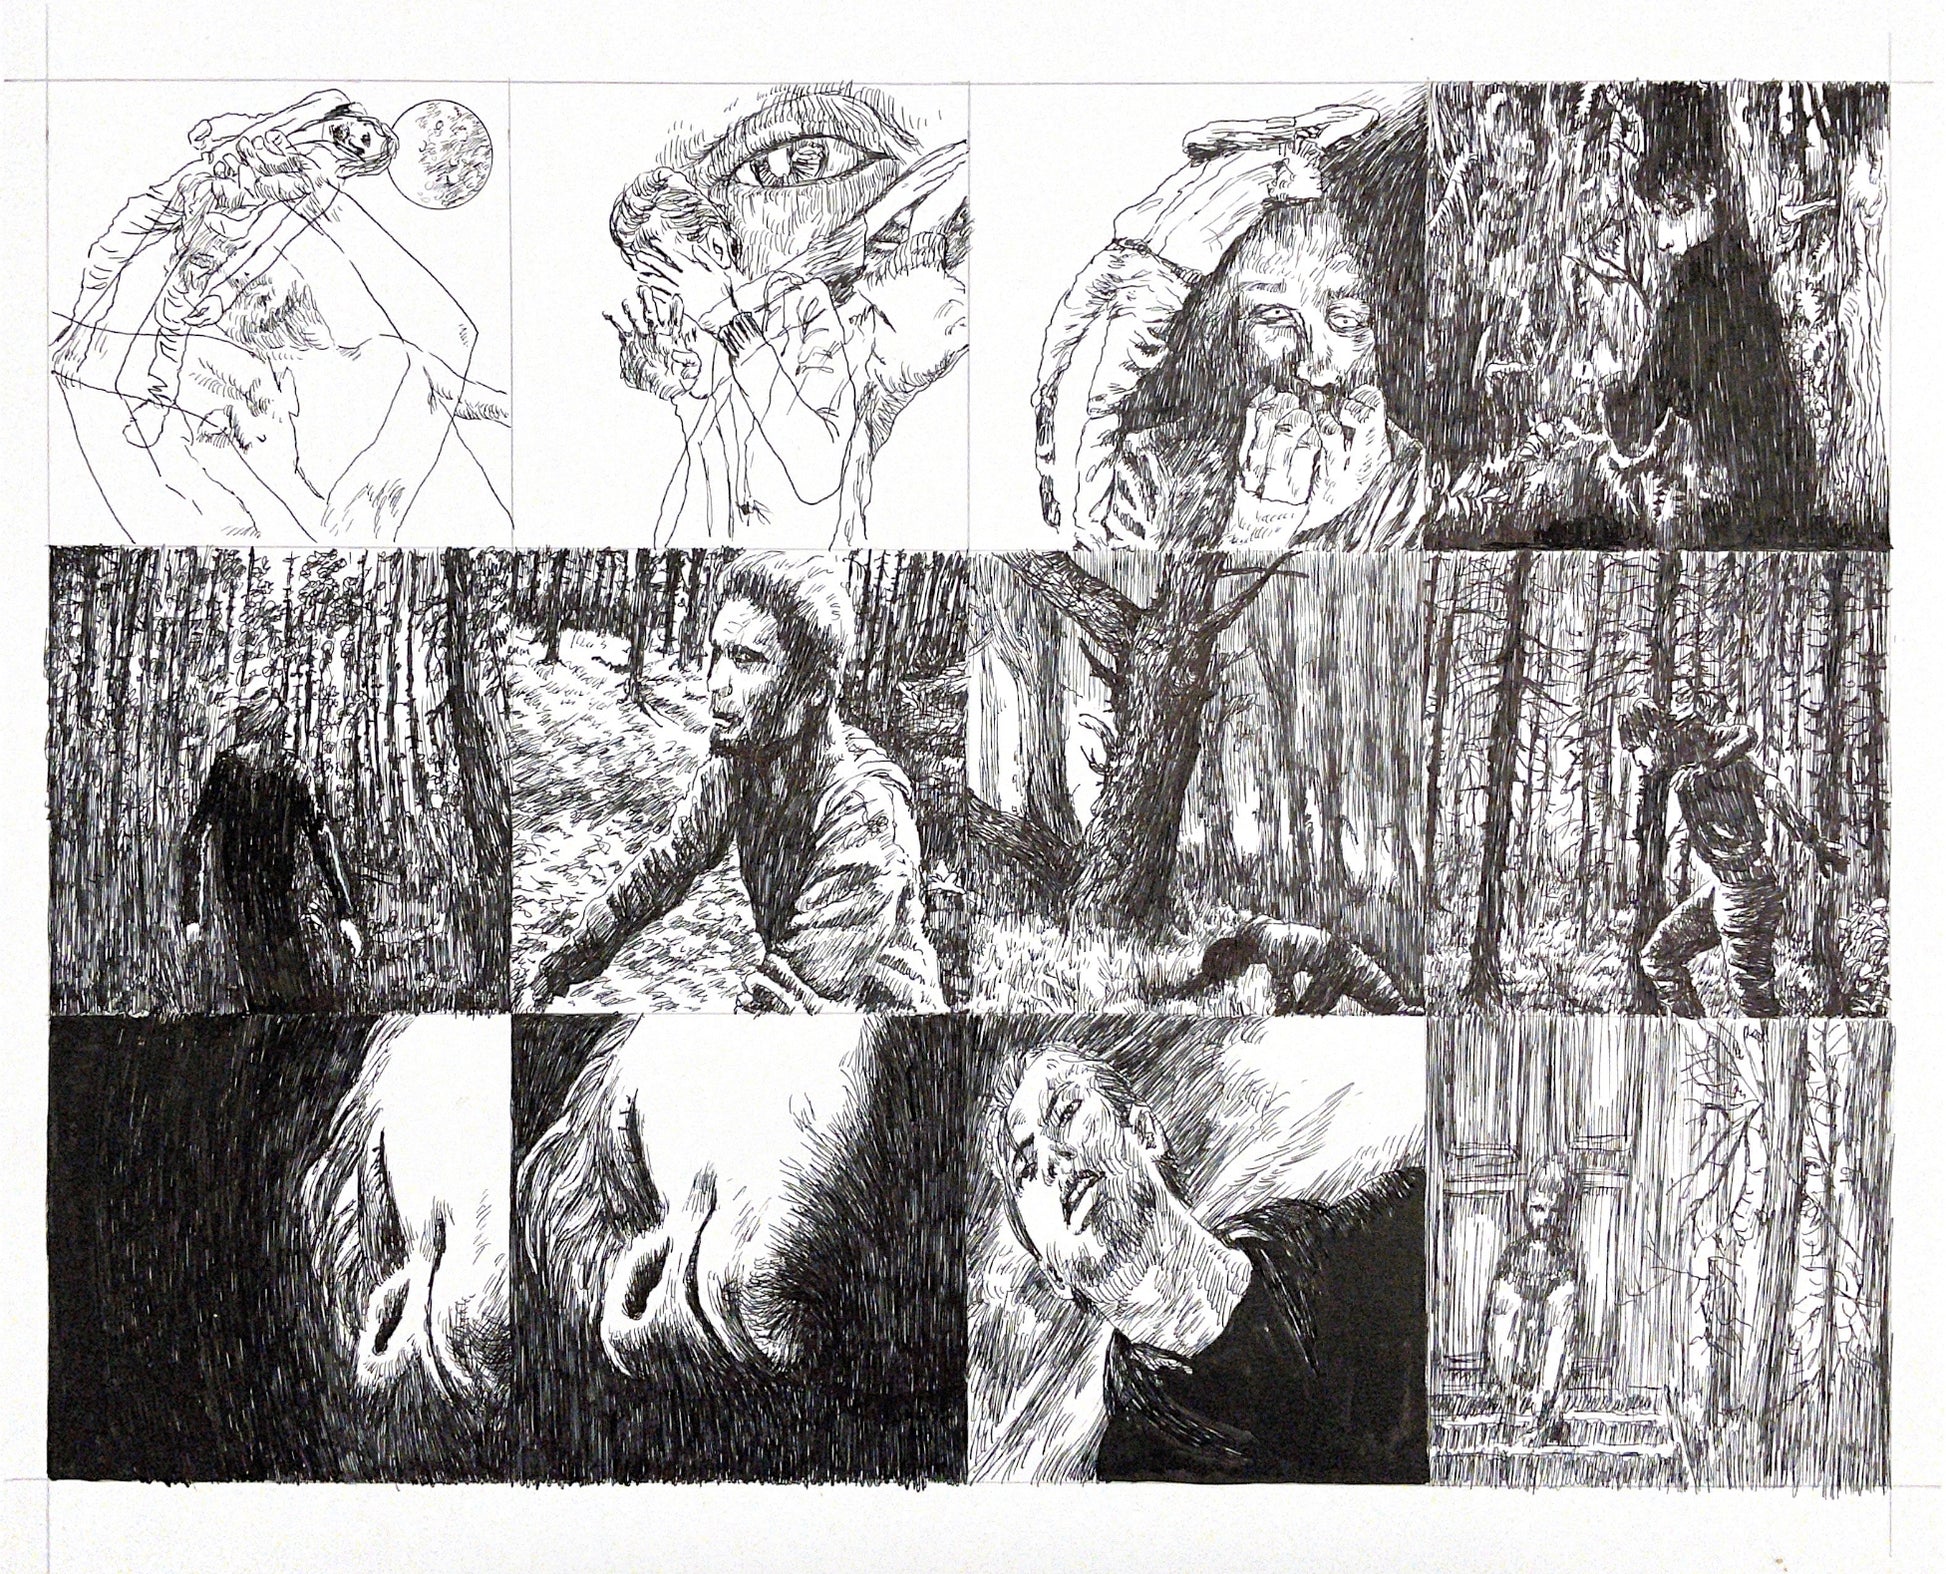 Graphic novel panels, featuring ink drawings, people, still images, woods and movement.